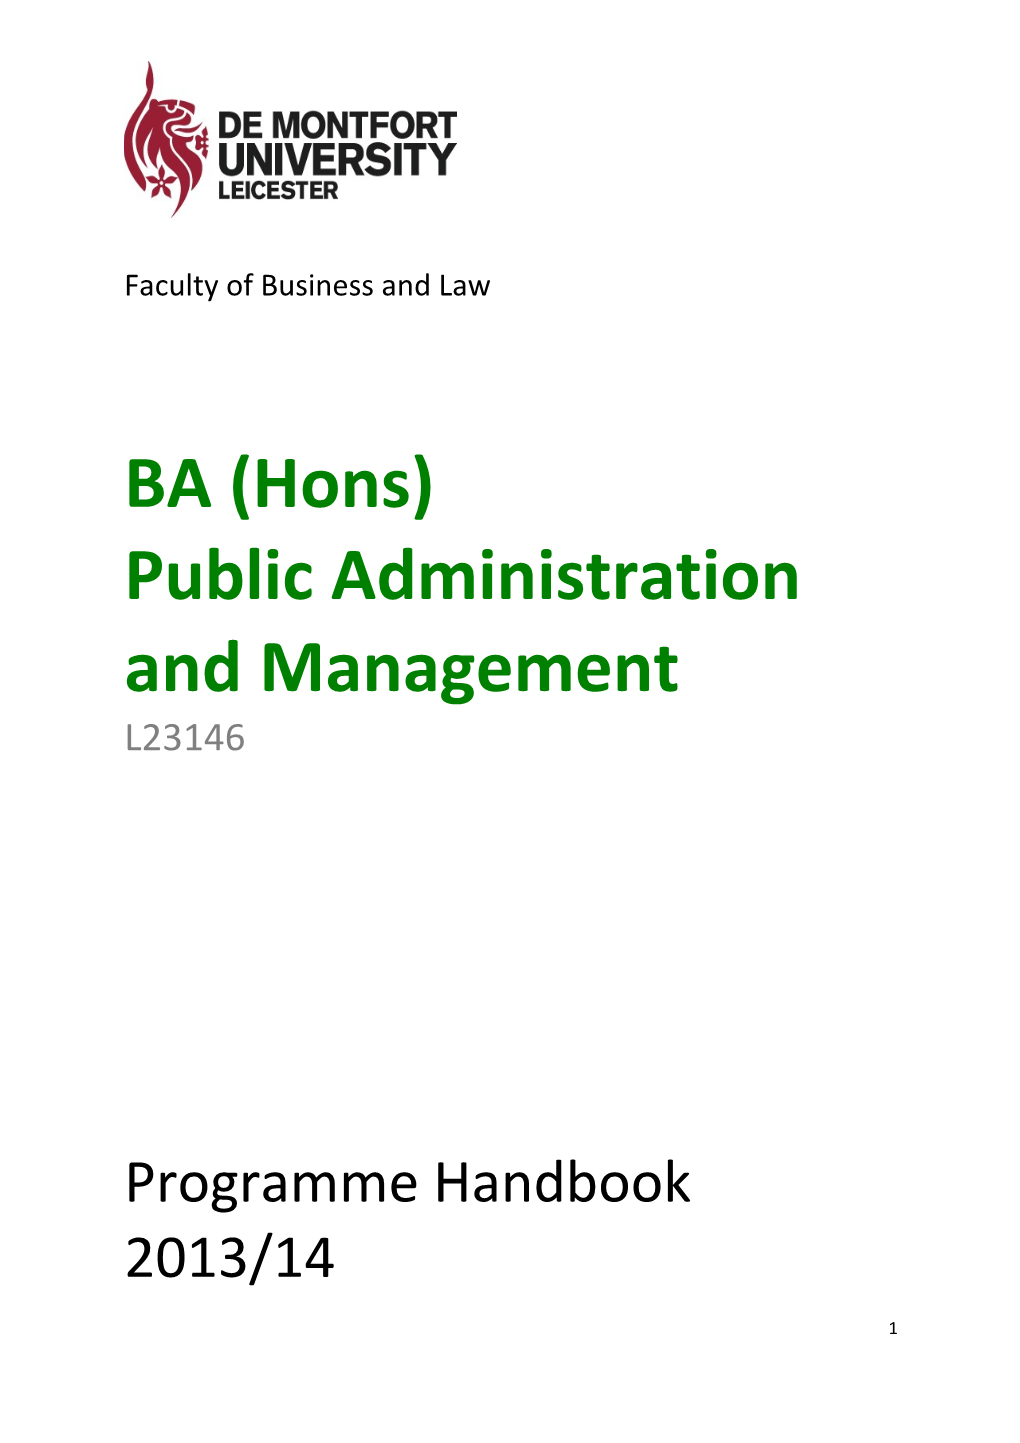 Public Administration and Management